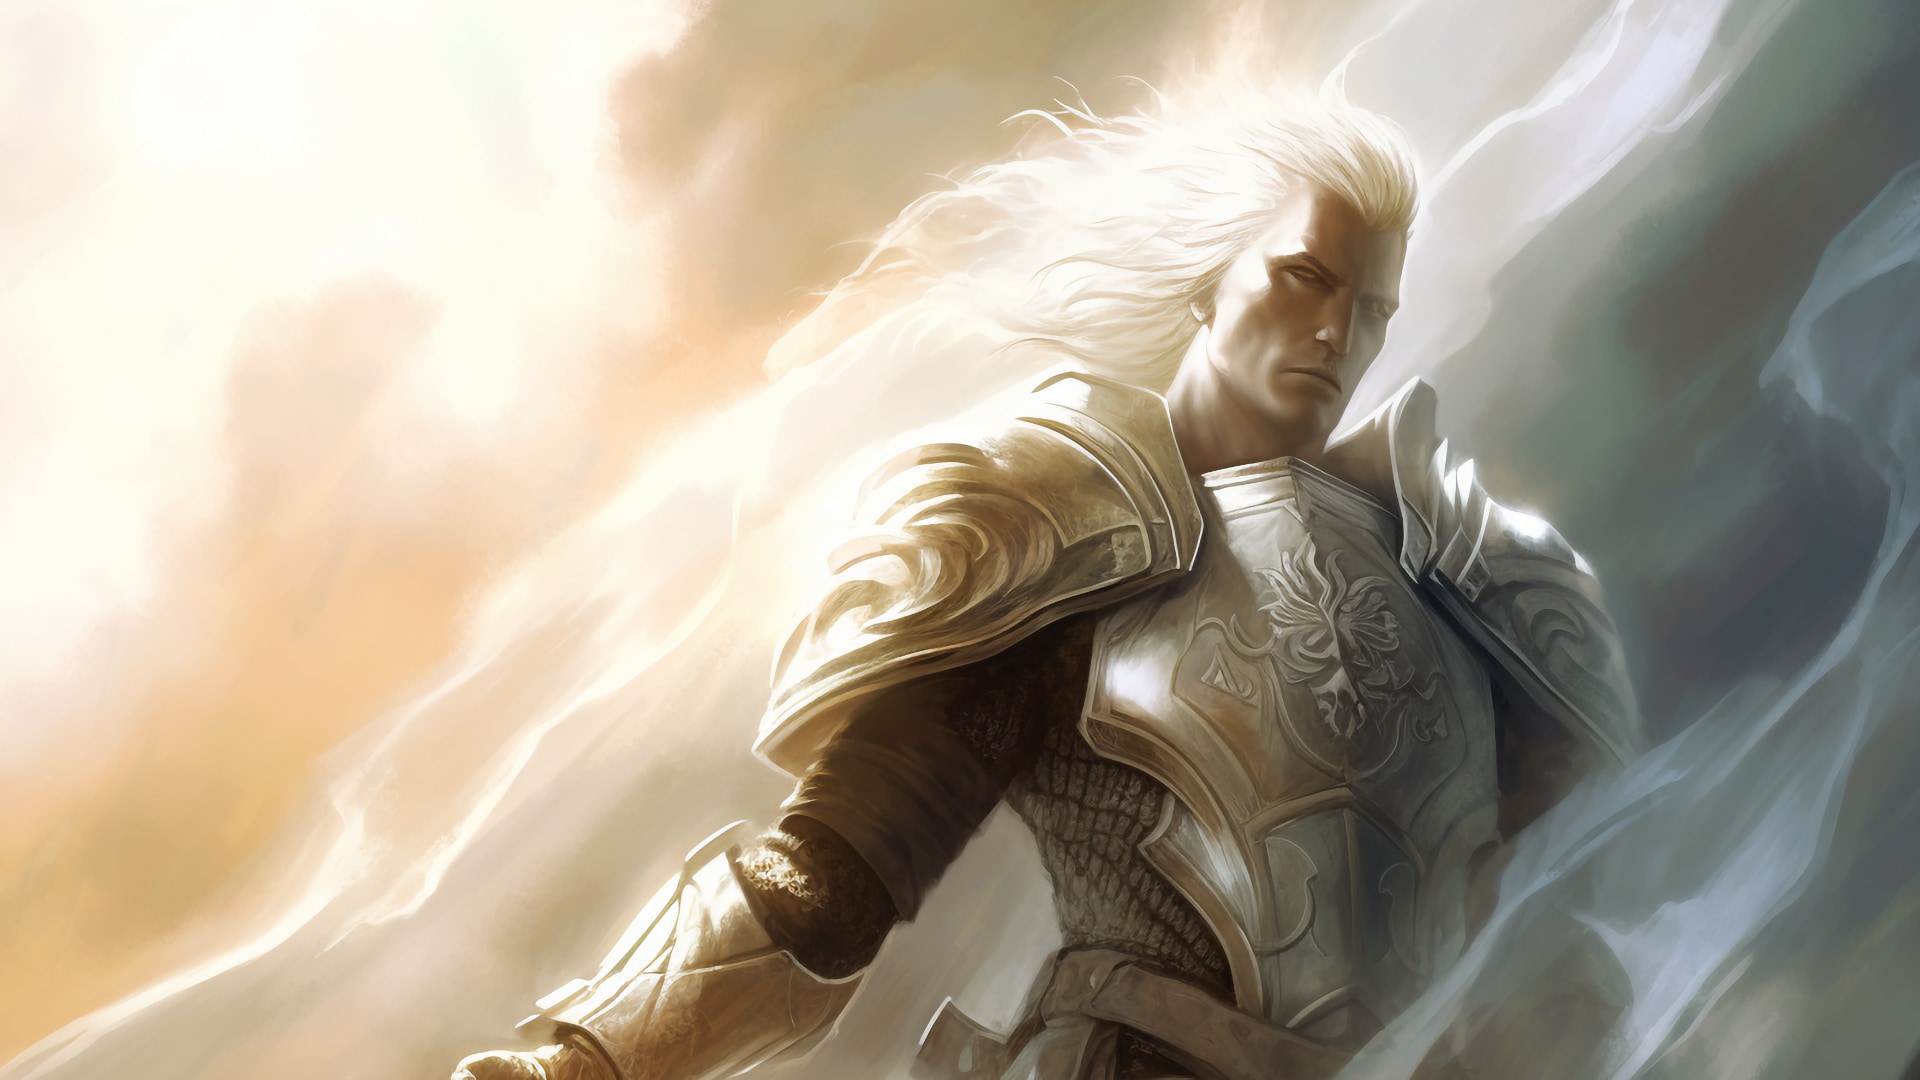 What are some original concepts for a paladin in D&D 5E? - Quora